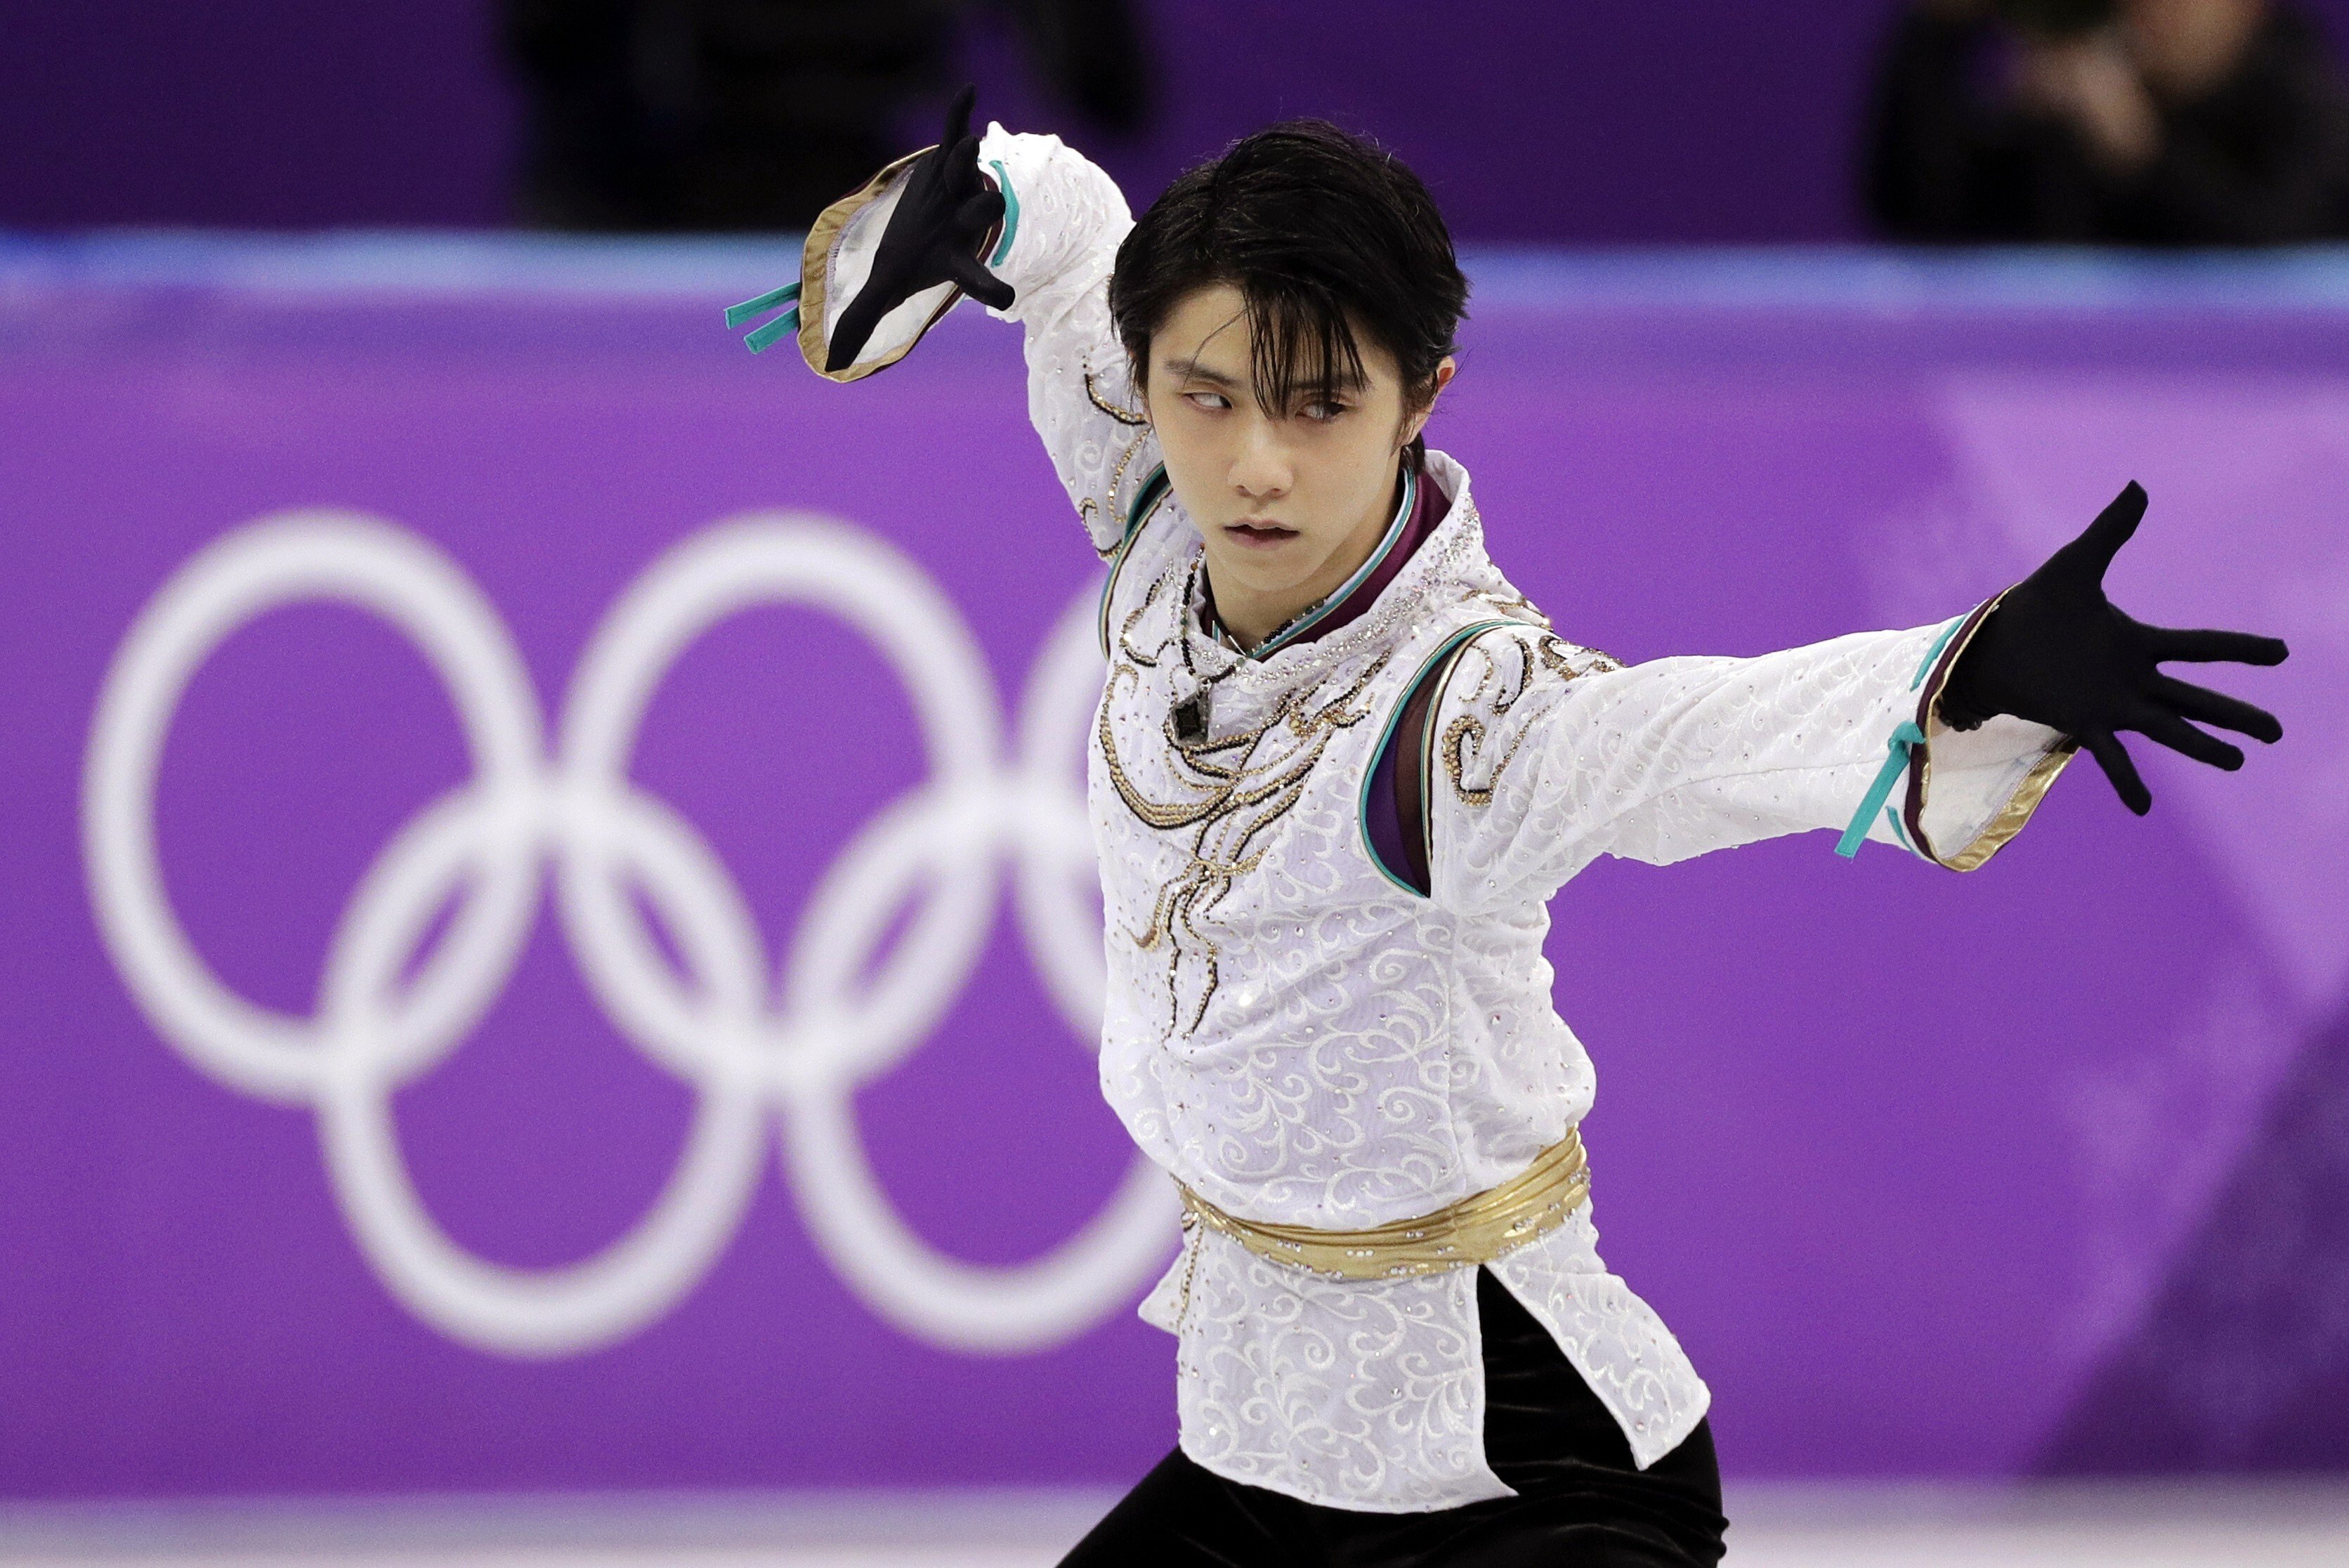 Yuzuru Hanyu: biography, family, two-time Olympic champion, Winnie the Pooh  traditions, and struggle with asthma | South China Morning Post